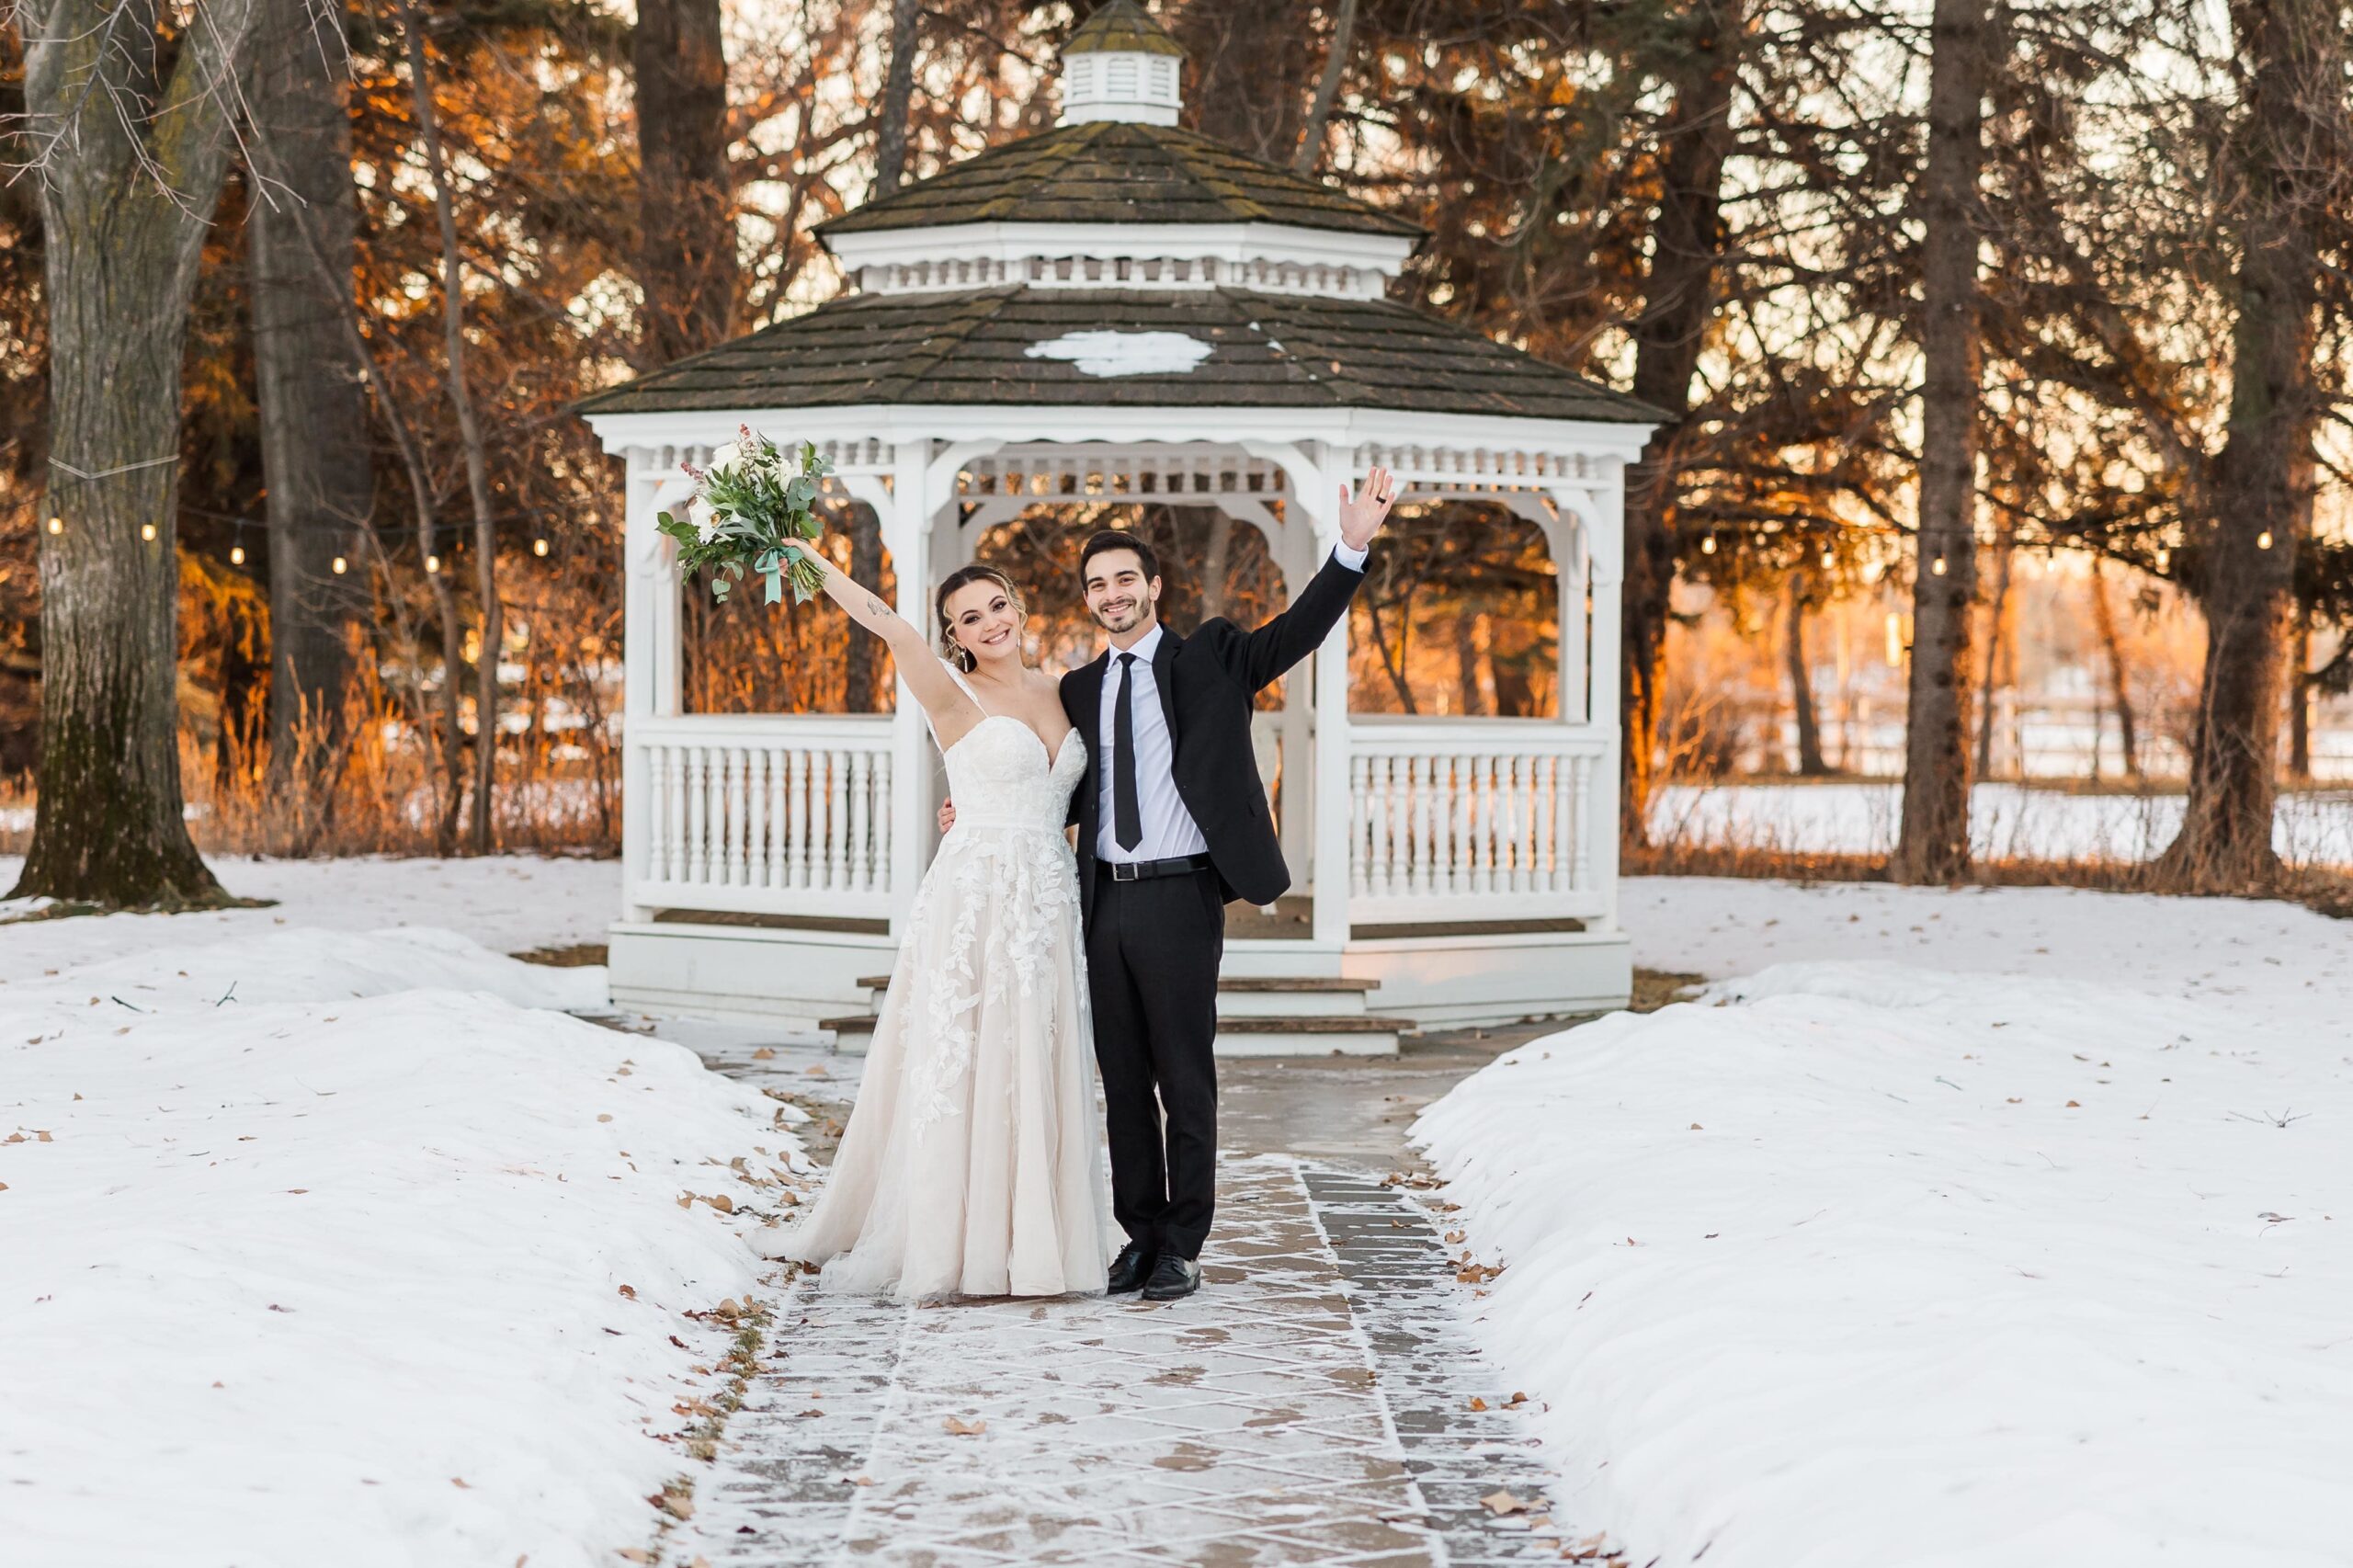 Brittany Anne Photography – Winter Wonderland at the Norland Historic Estate-20